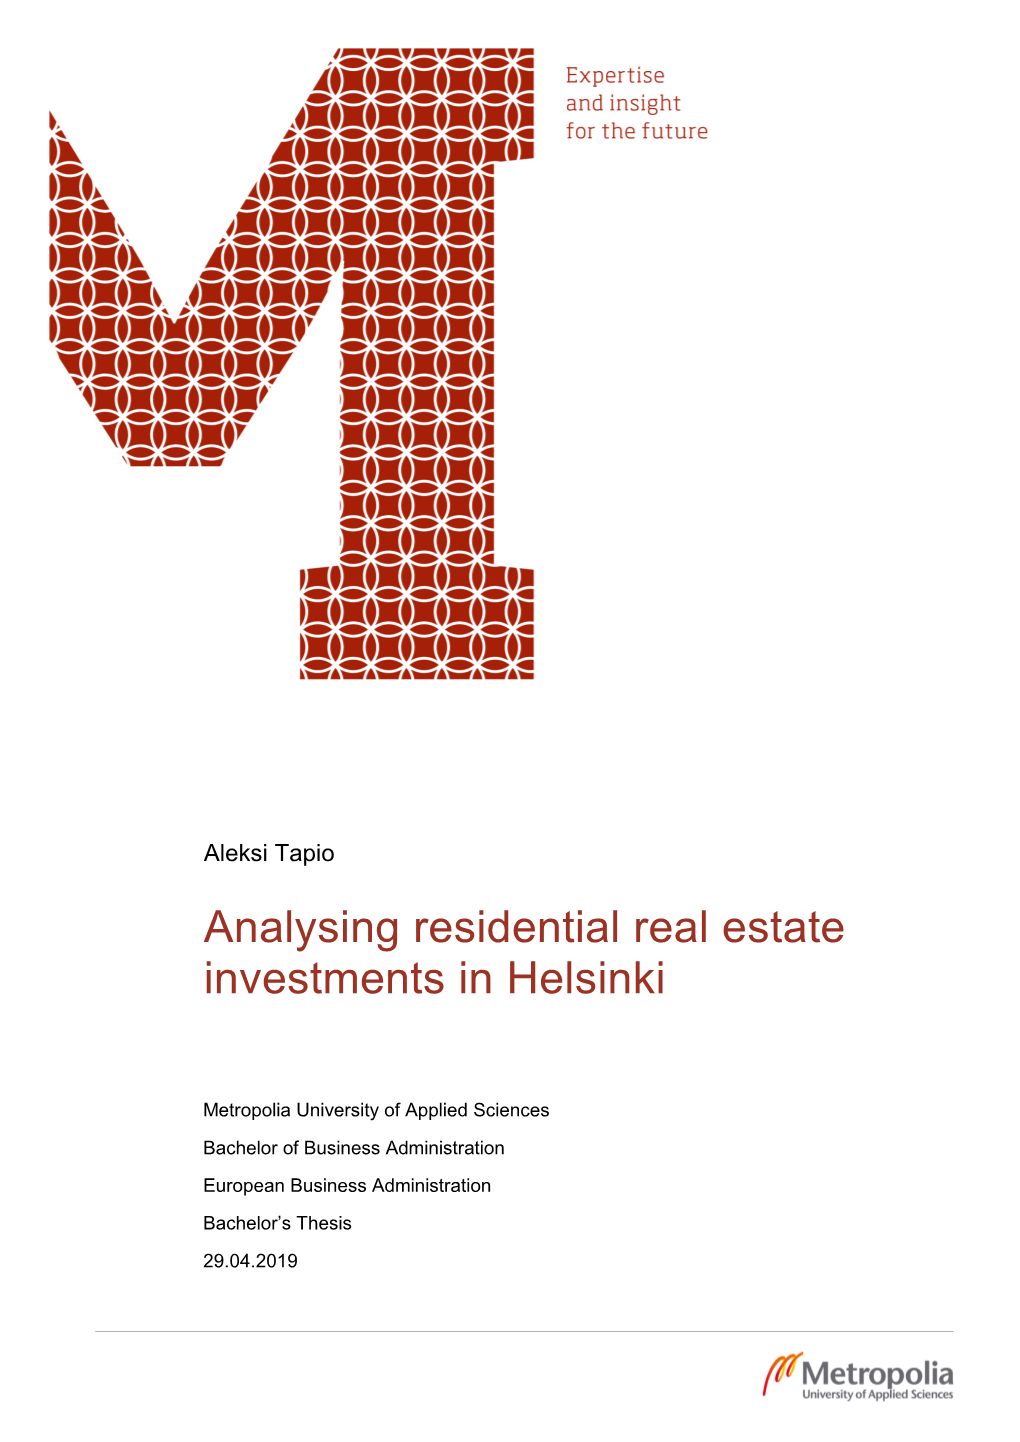 Analysing Residential Real Estate Investments in Helsinki